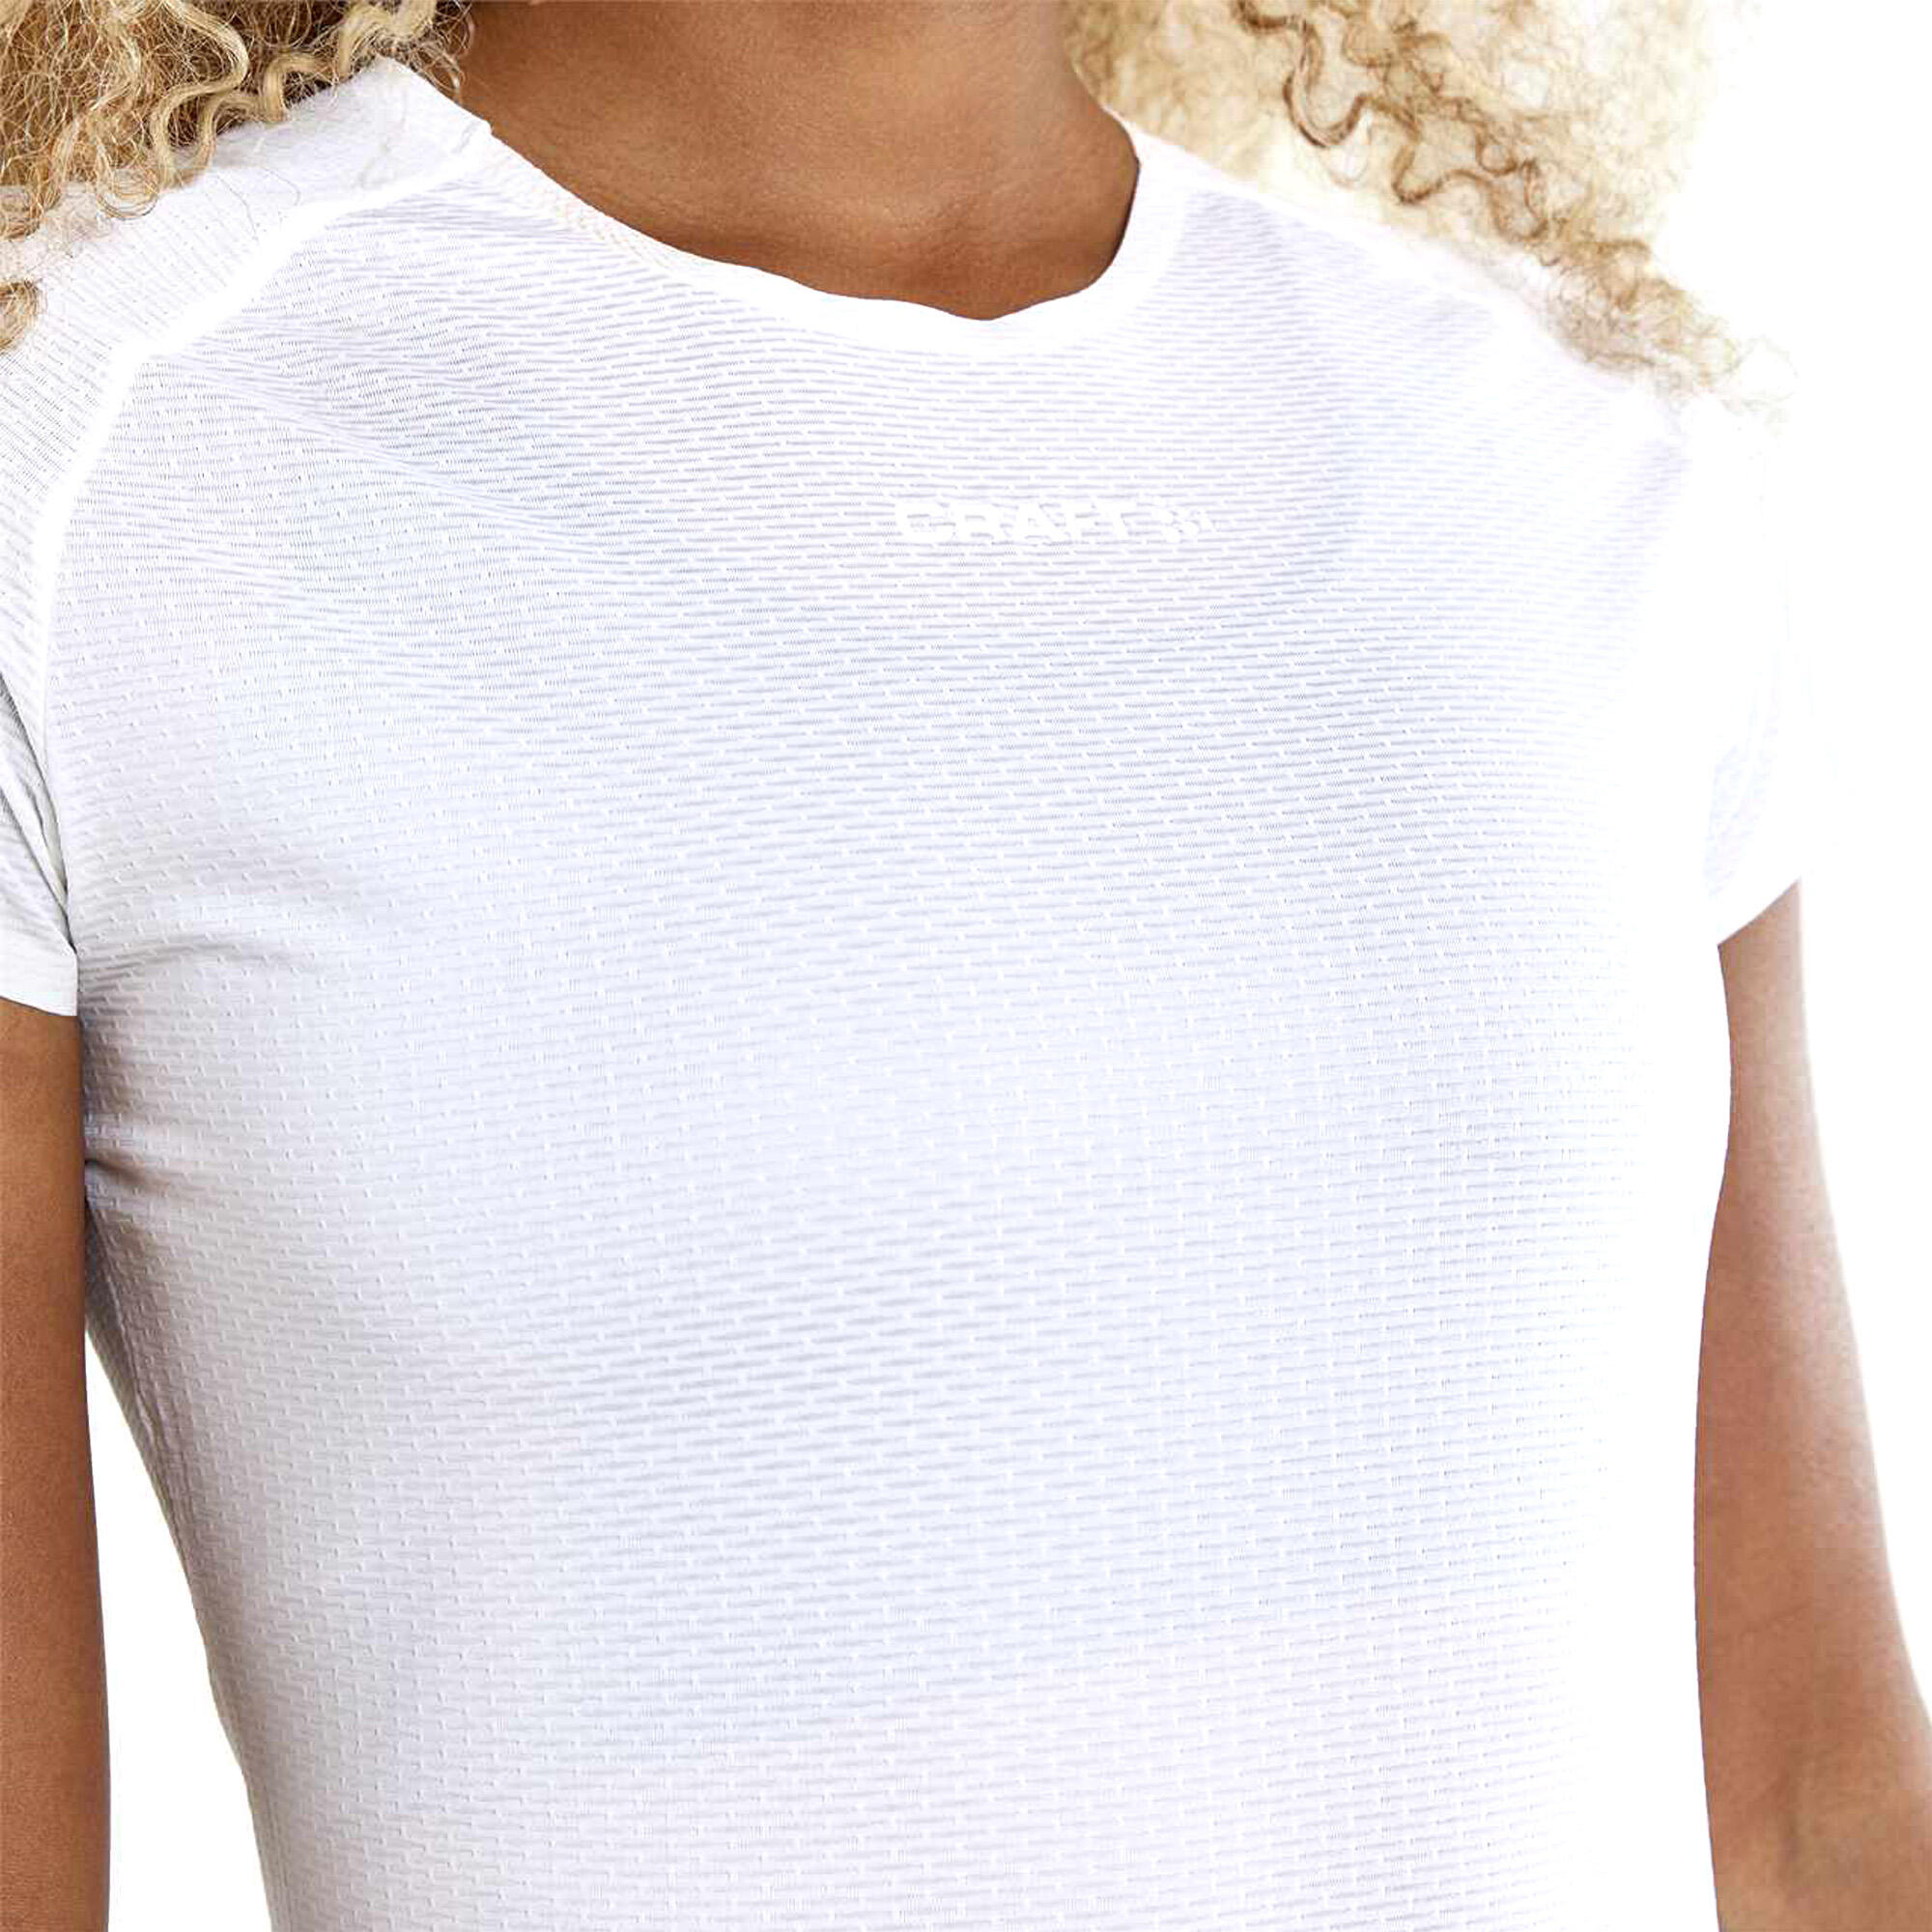 Womens/Ladies Pro Quick Dry Base Layer Top (White) 3/4